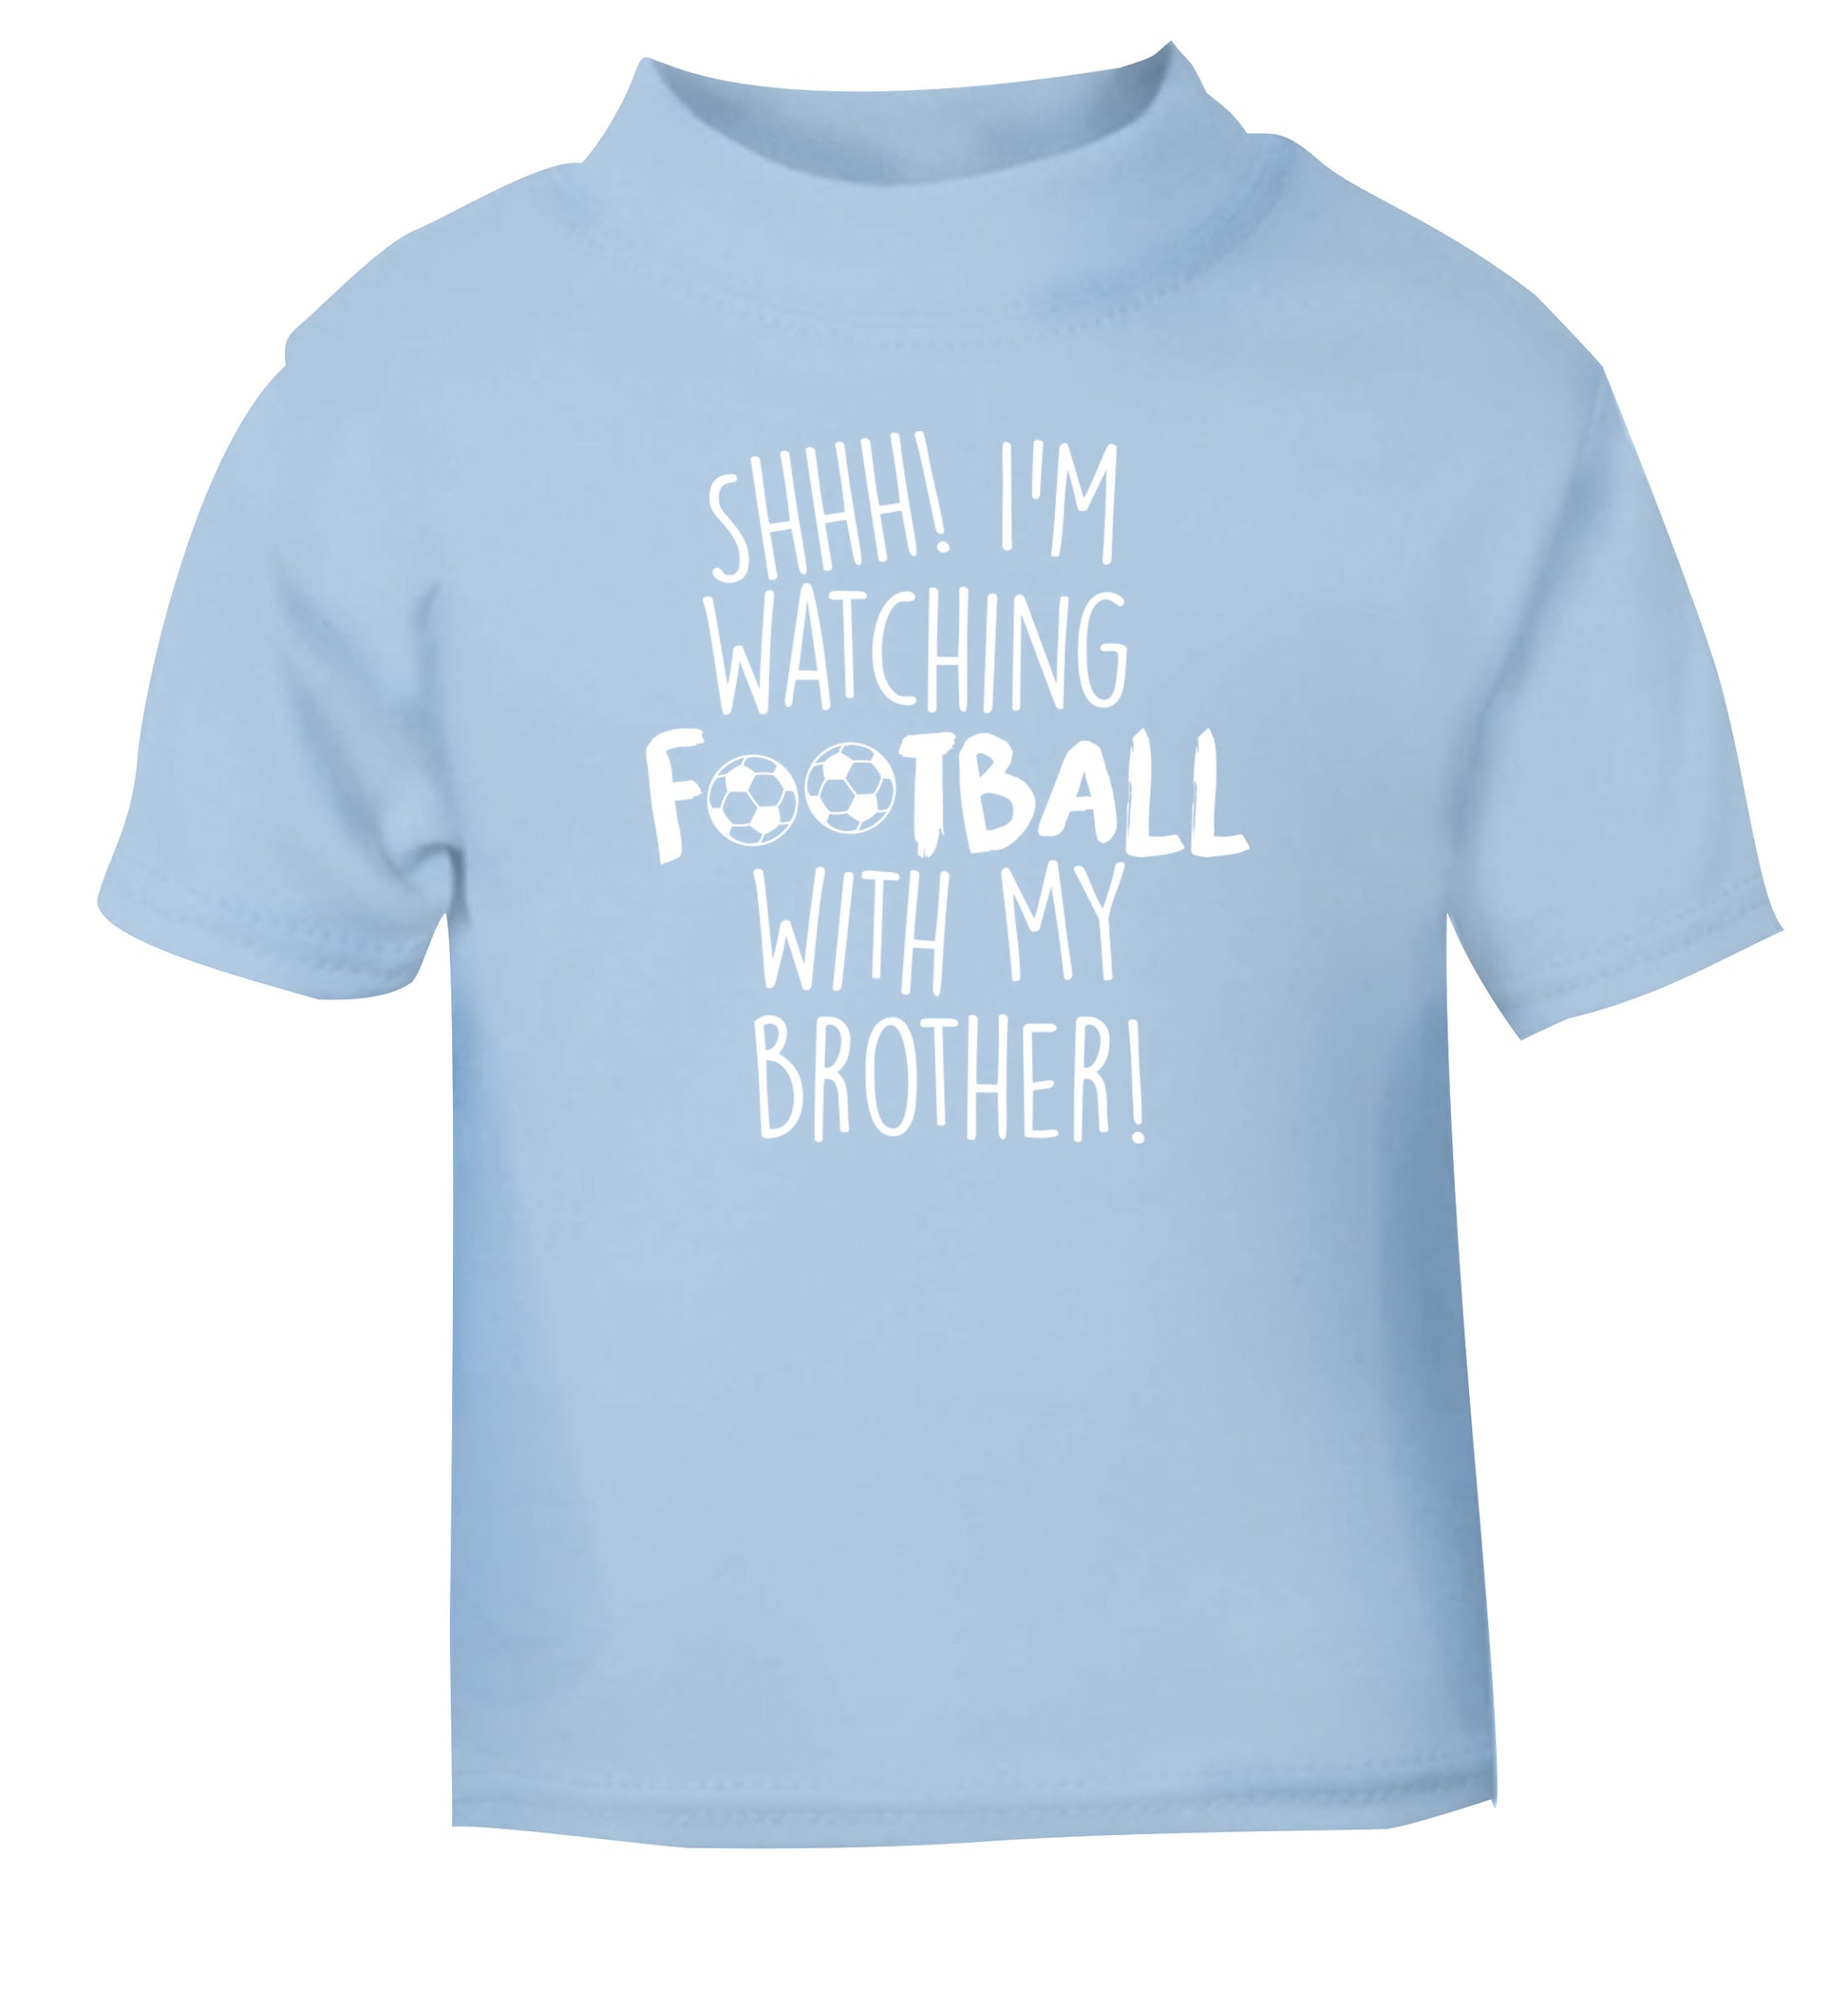 Shhh I'm watching football with my brother light blue Baby Toddler Tshirt 2 Years